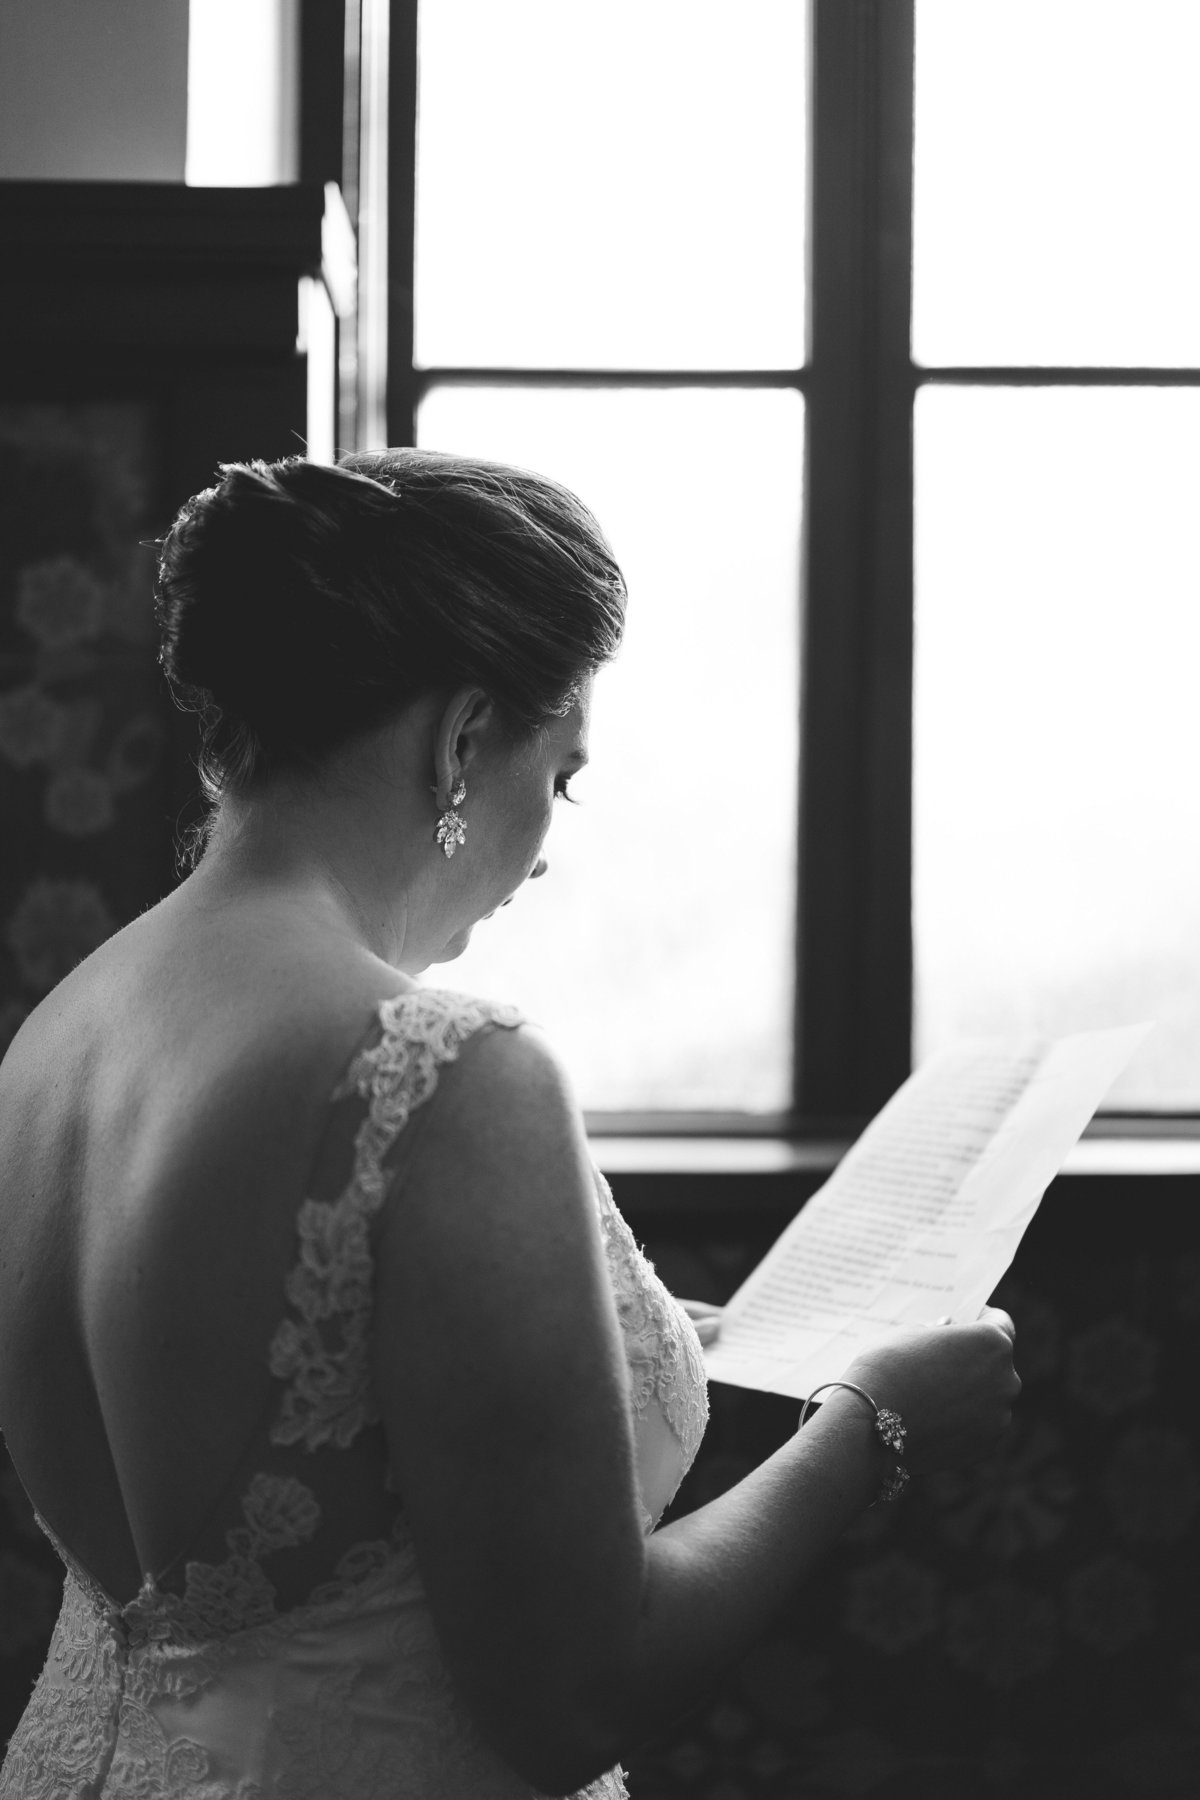 Bride reading over her wedding vows before wedding ceremony at Hotel Emma in downtown San Antonio